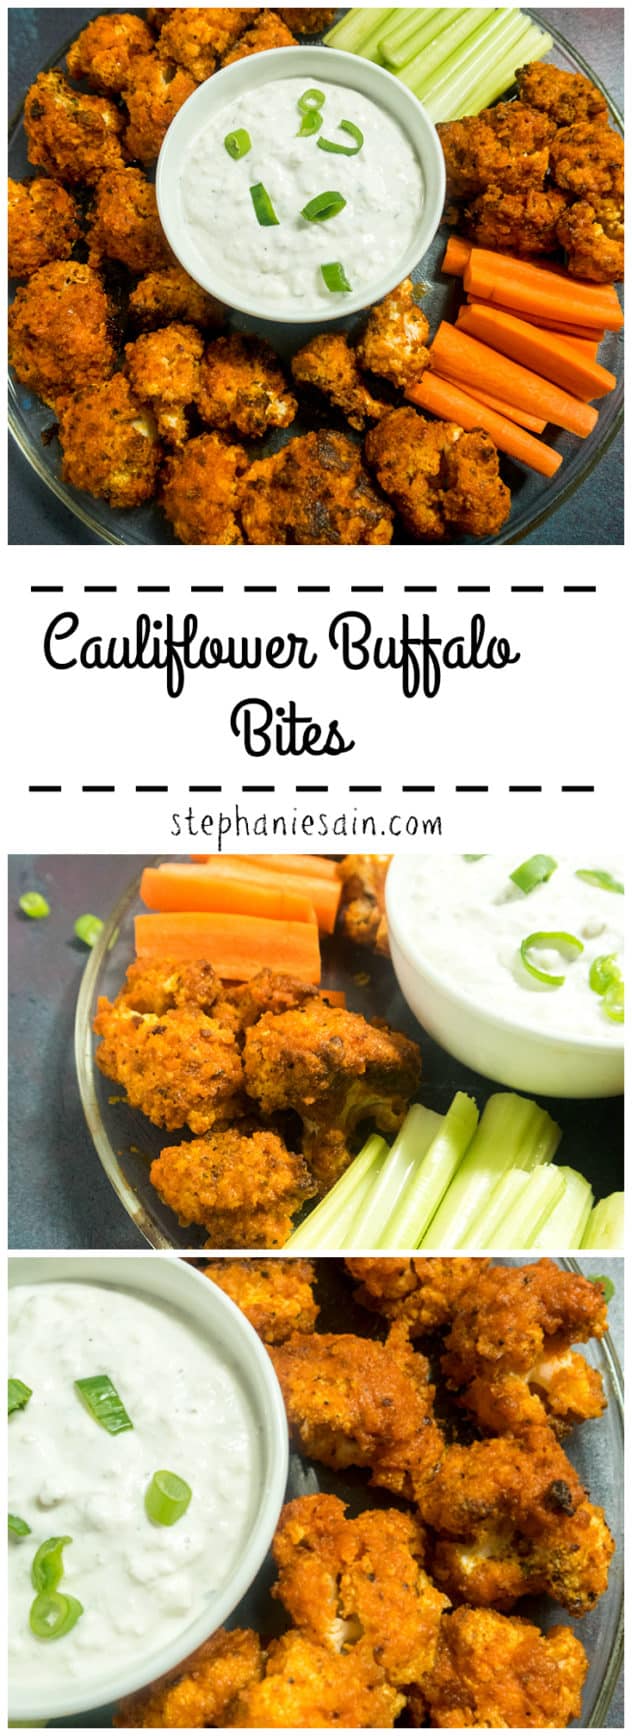 Cauliflower Buffalo Bites are a tasty, healthy vegetarian option for buffalo wings. Easy to prepare with only a couple ingredients. Gluten Free.